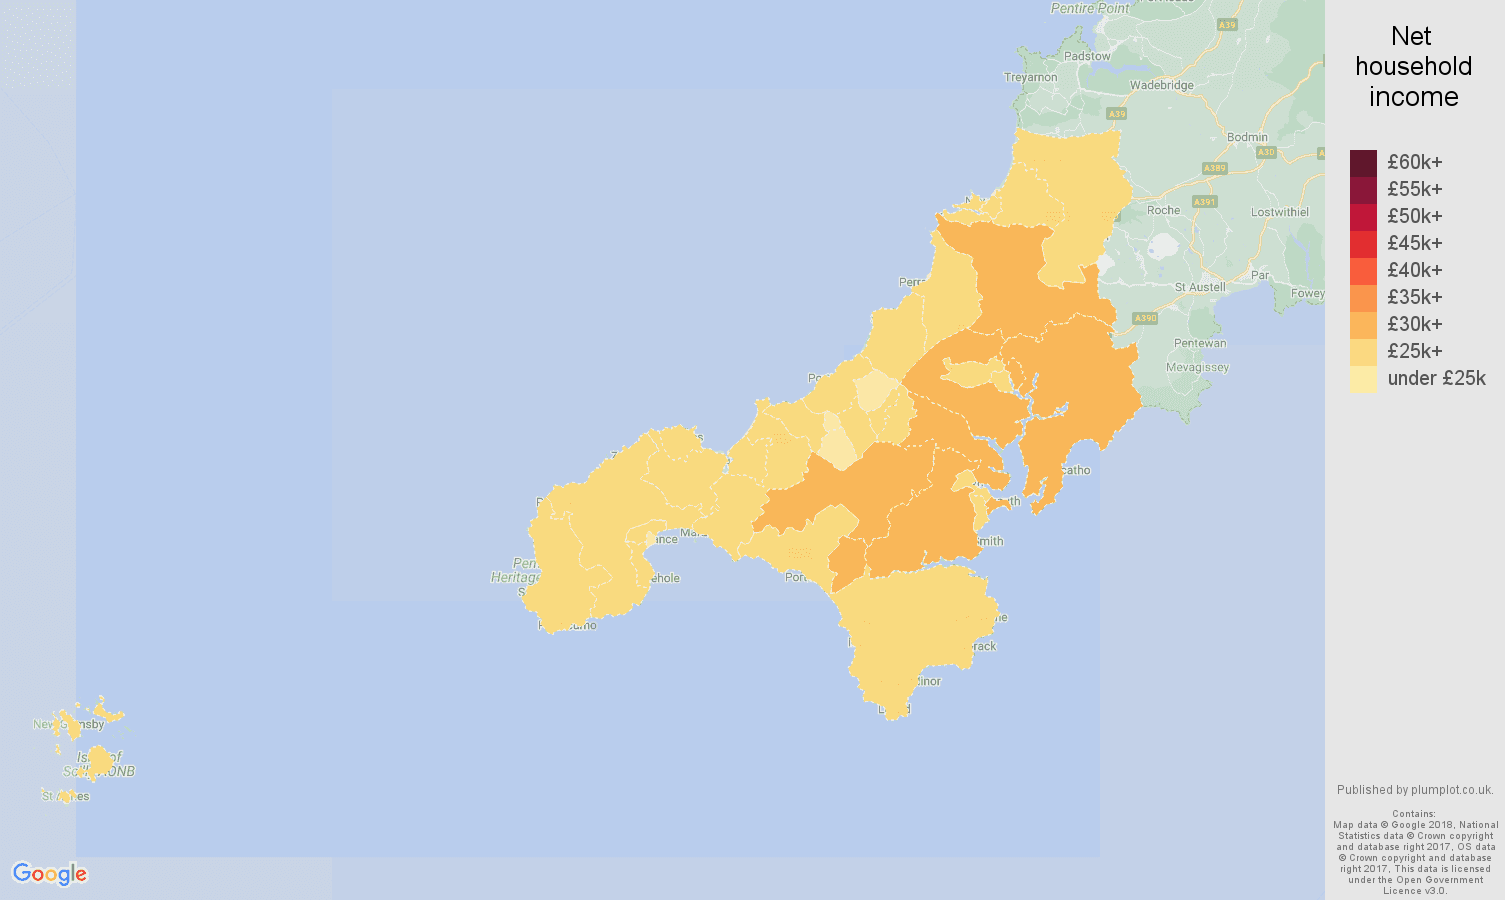 Truro net household income map